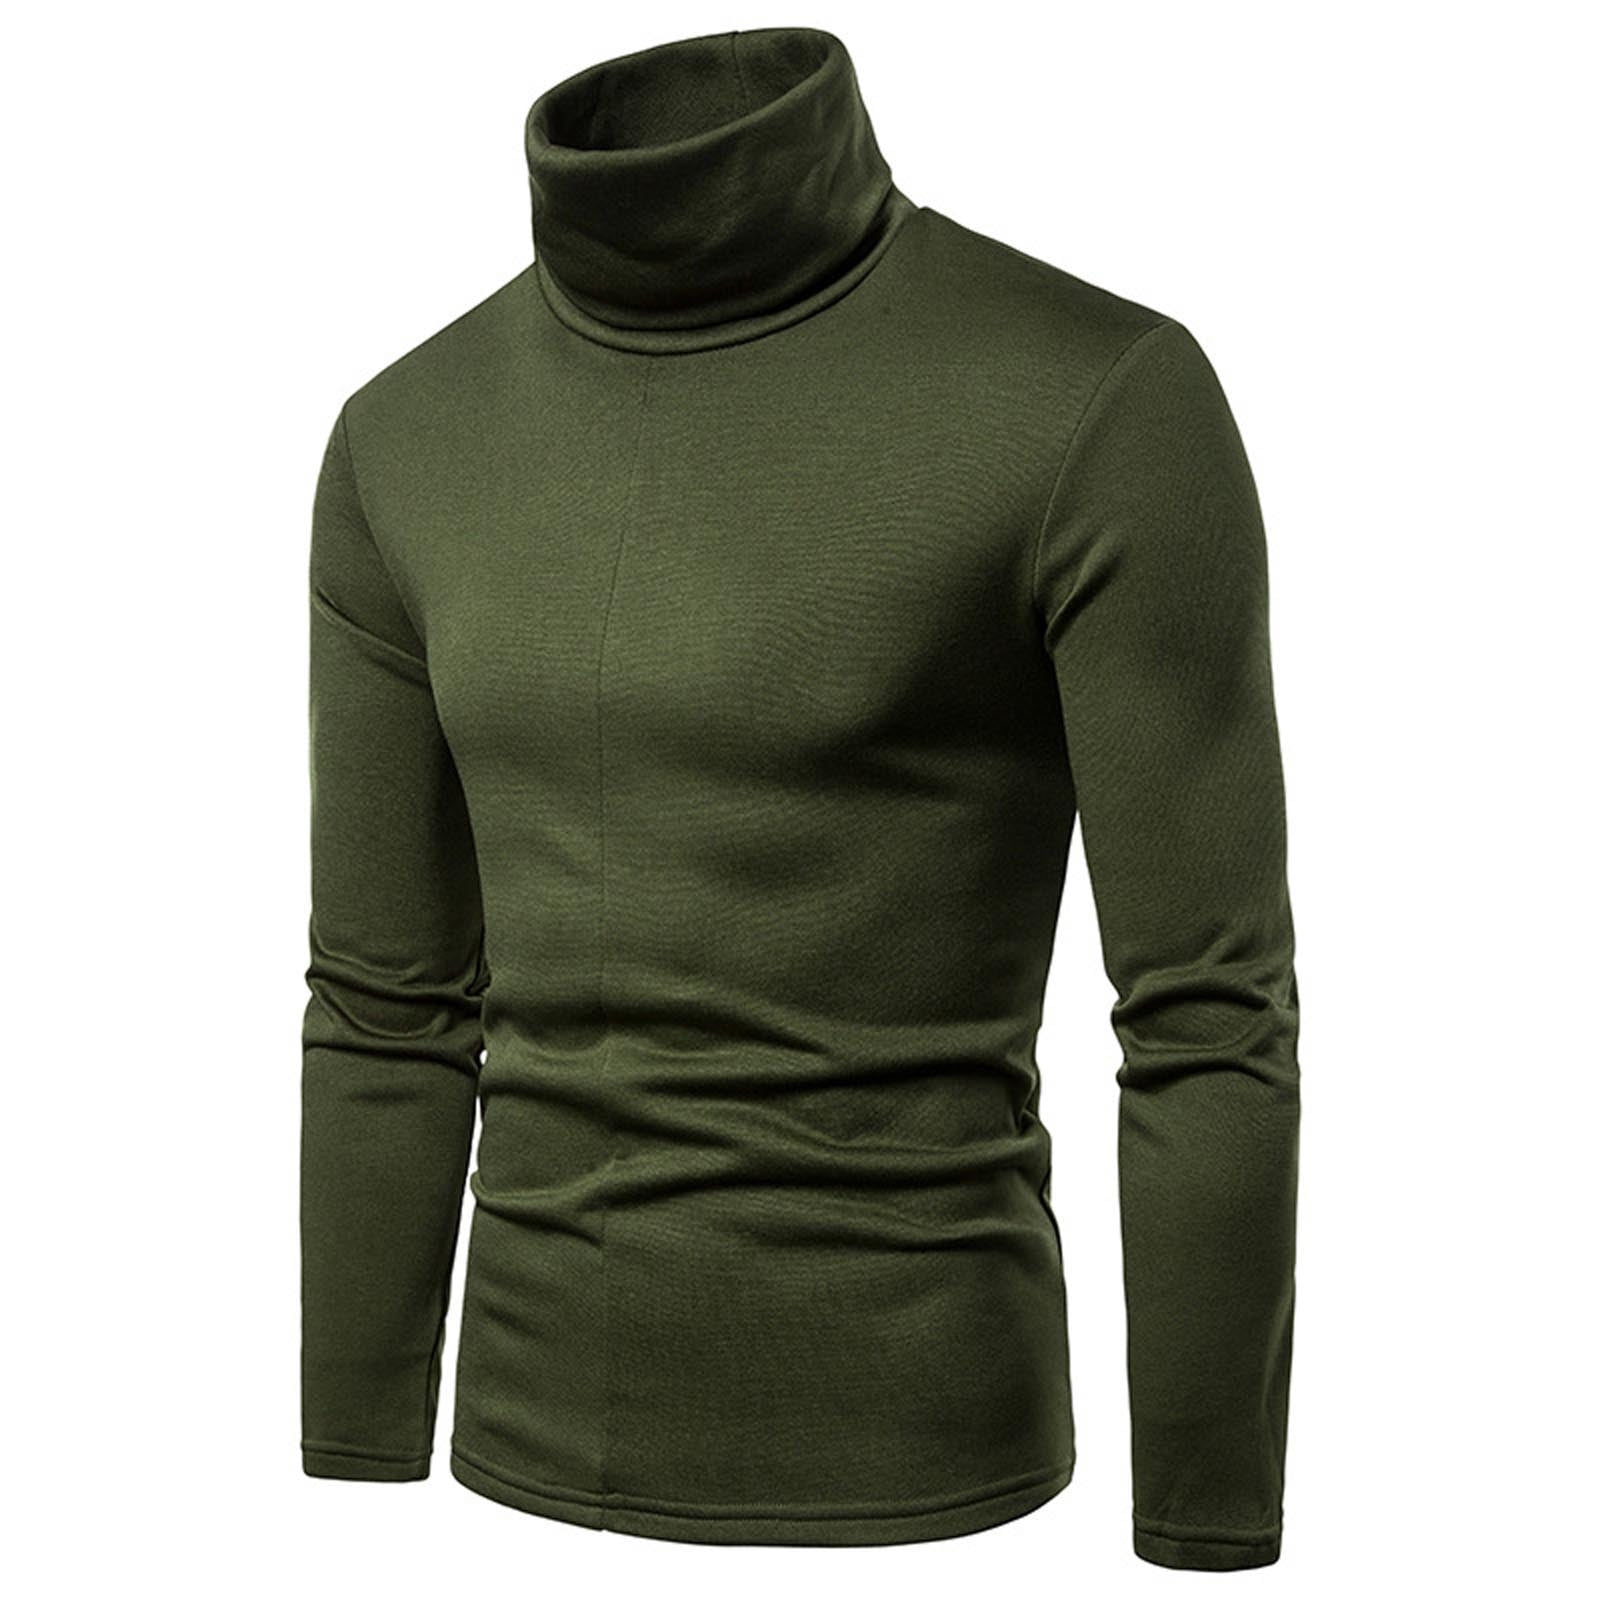 EGNMCR Mens Turtleneck Sweaters Winter Stylish Casual Solid Color ...